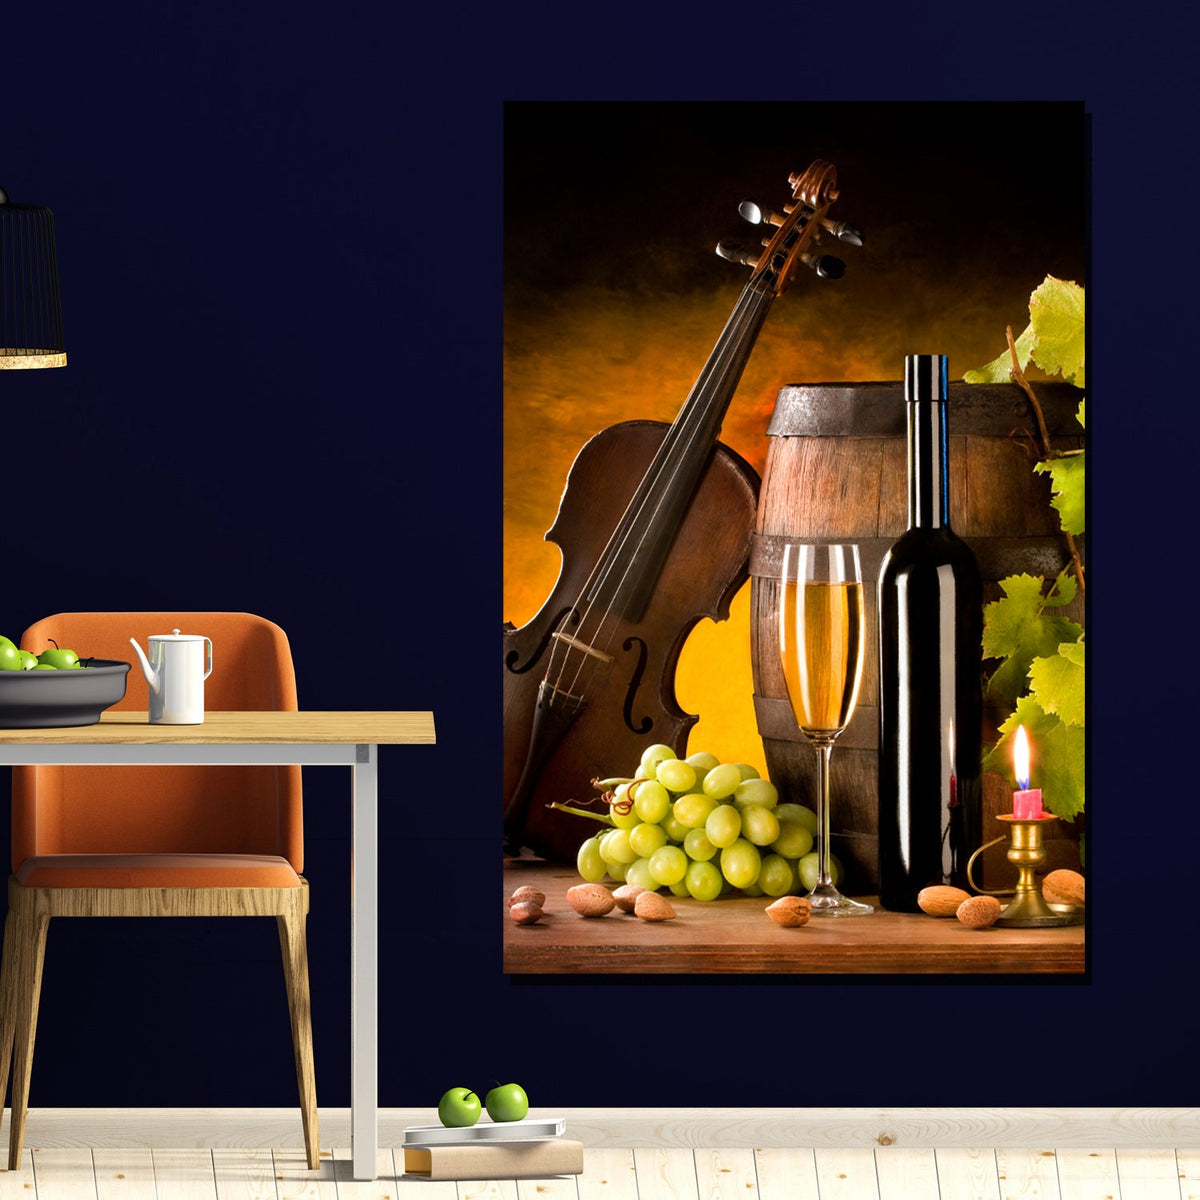 https://cdn.shopify.com/s/files/1/0387/9986/8044/products/WineandviolinCanvasPrintStretched-2.jpg